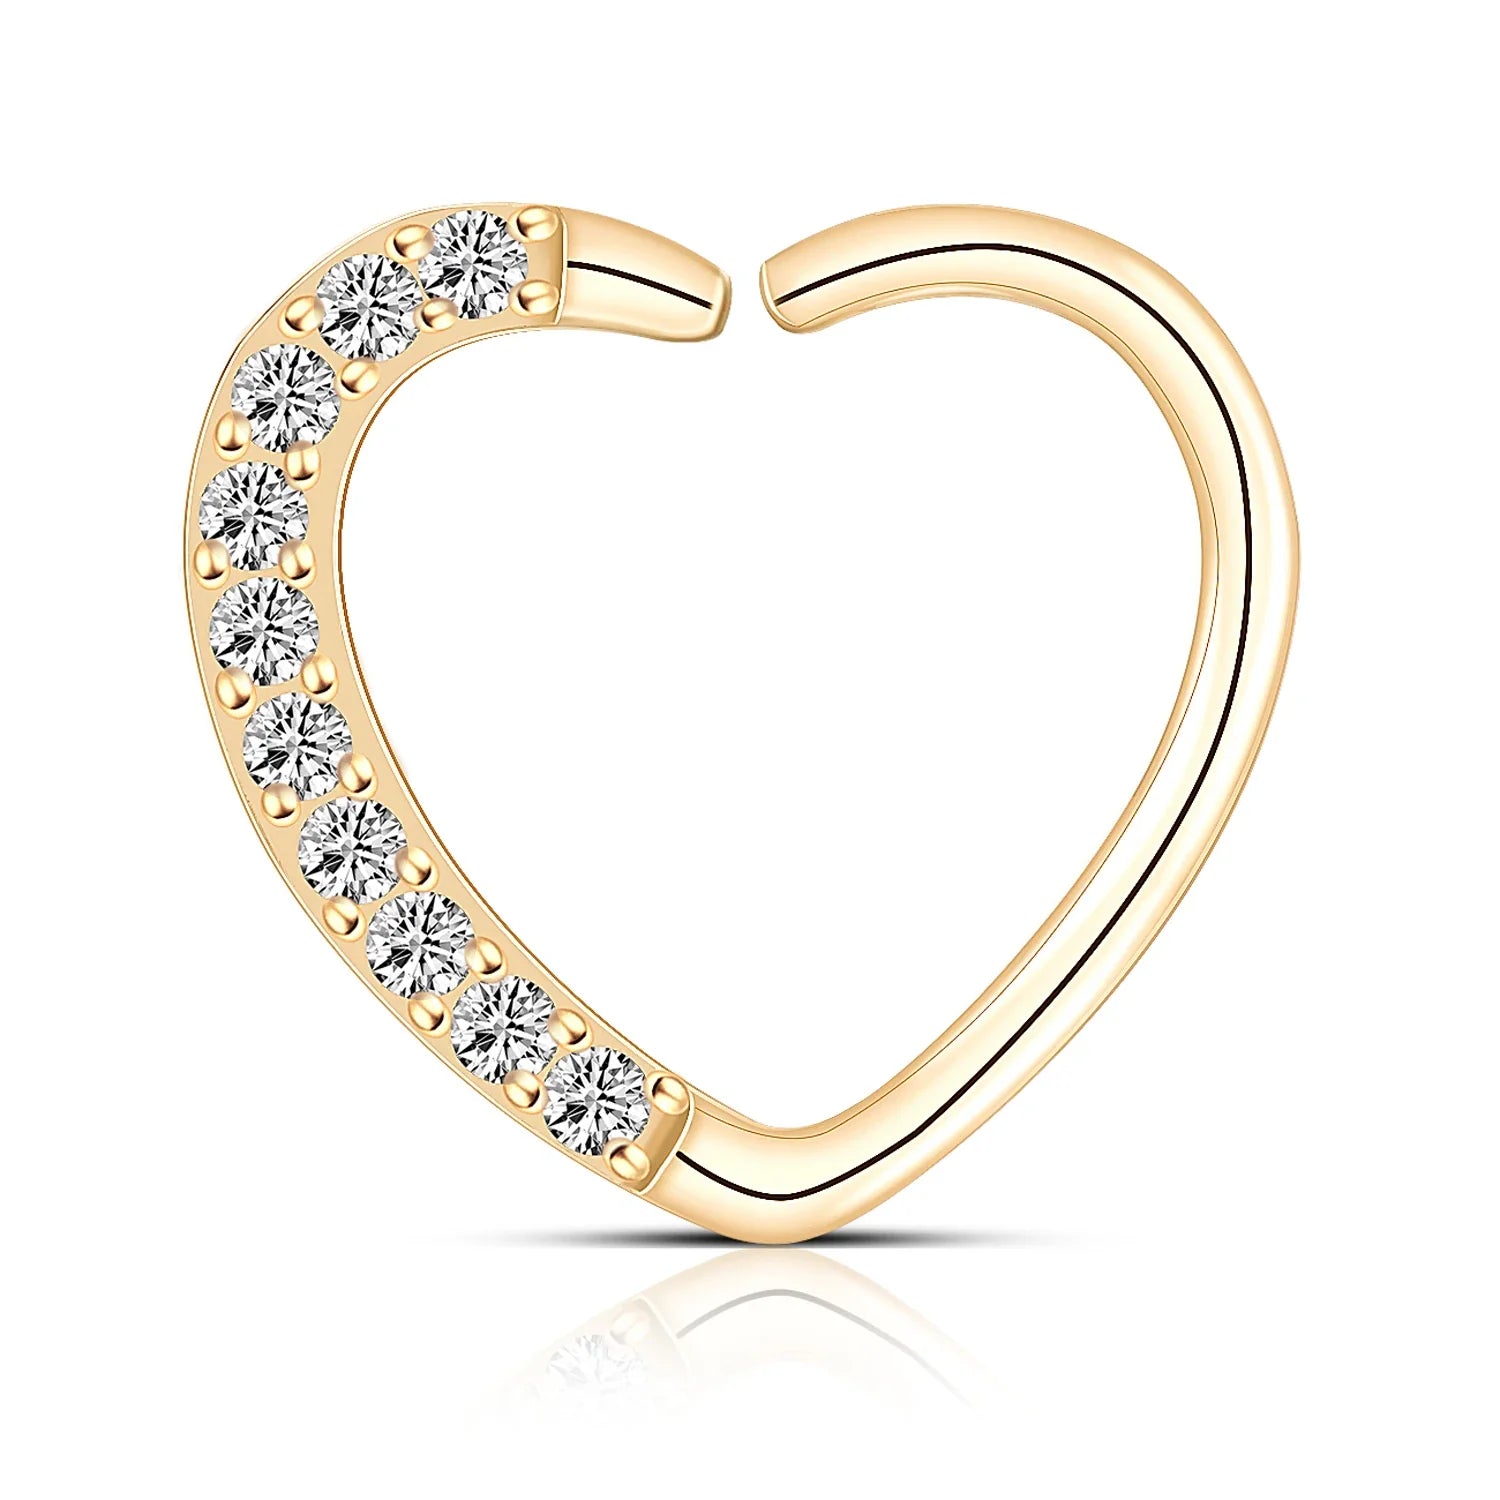 14k gold heart ring with diamonds daith earring with clear CZ stones solid gold Ashley Piercing Jewelry